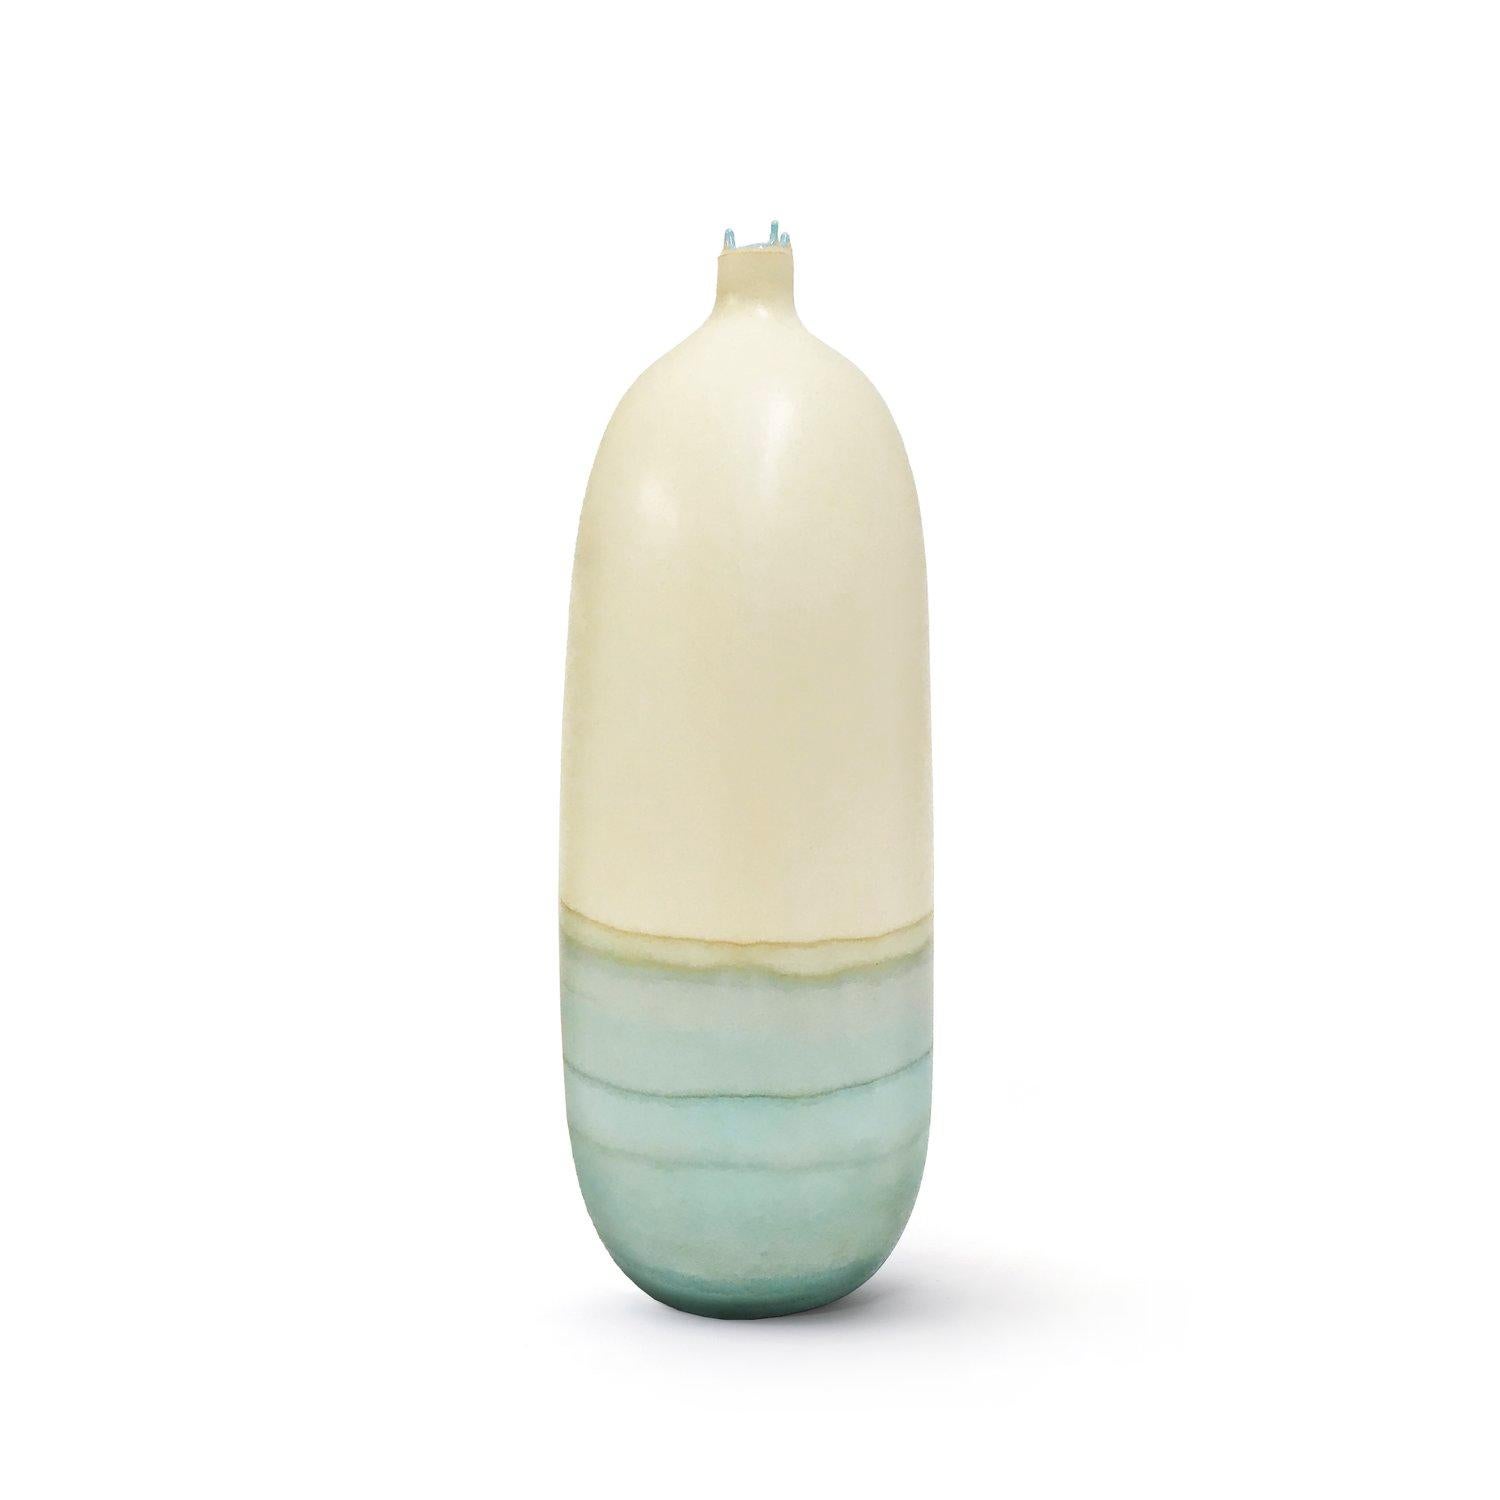 Bone and ice blue venus vase by Elyse Graham
Dimensions: W 14 x D 14 x H 38 cm
Materials: Plaster, Resin
Molded, dyed, and finished by hand in LA. Customization
Available.
All pieces are made to order

This collection of vessels is inspired